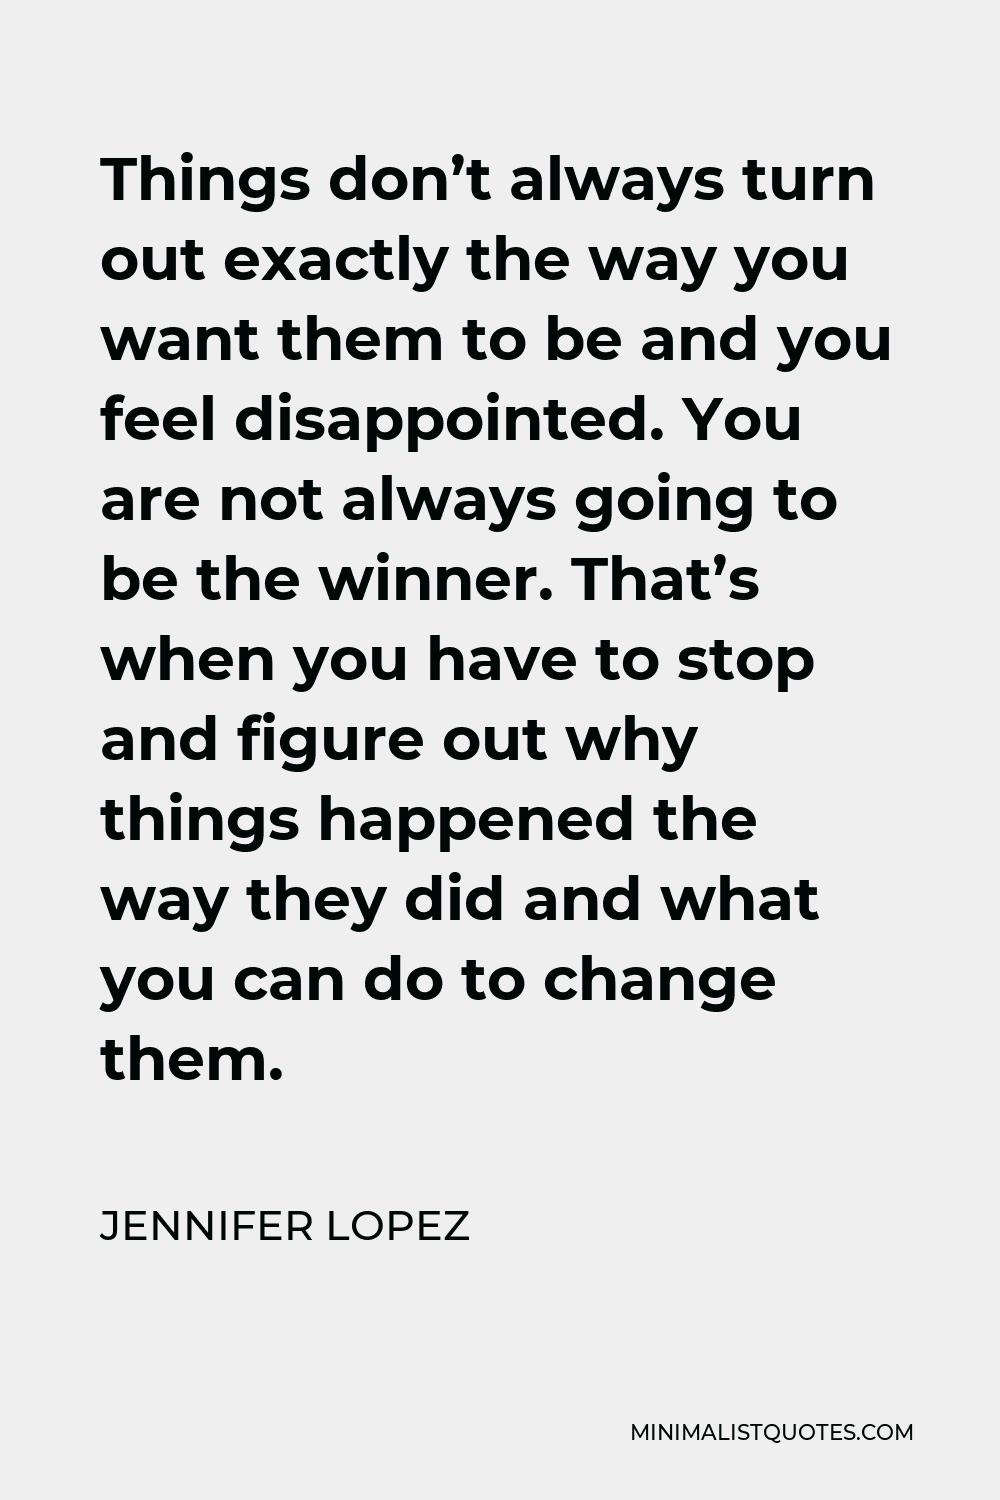 Jennifer Lopez Quote - Things don’t always turn out exactly the way you want them to be and you feel disappointed. You are not always going to be the winner. That’s when you have to stop and figure out why things happened the way they did and what you can do to change them.